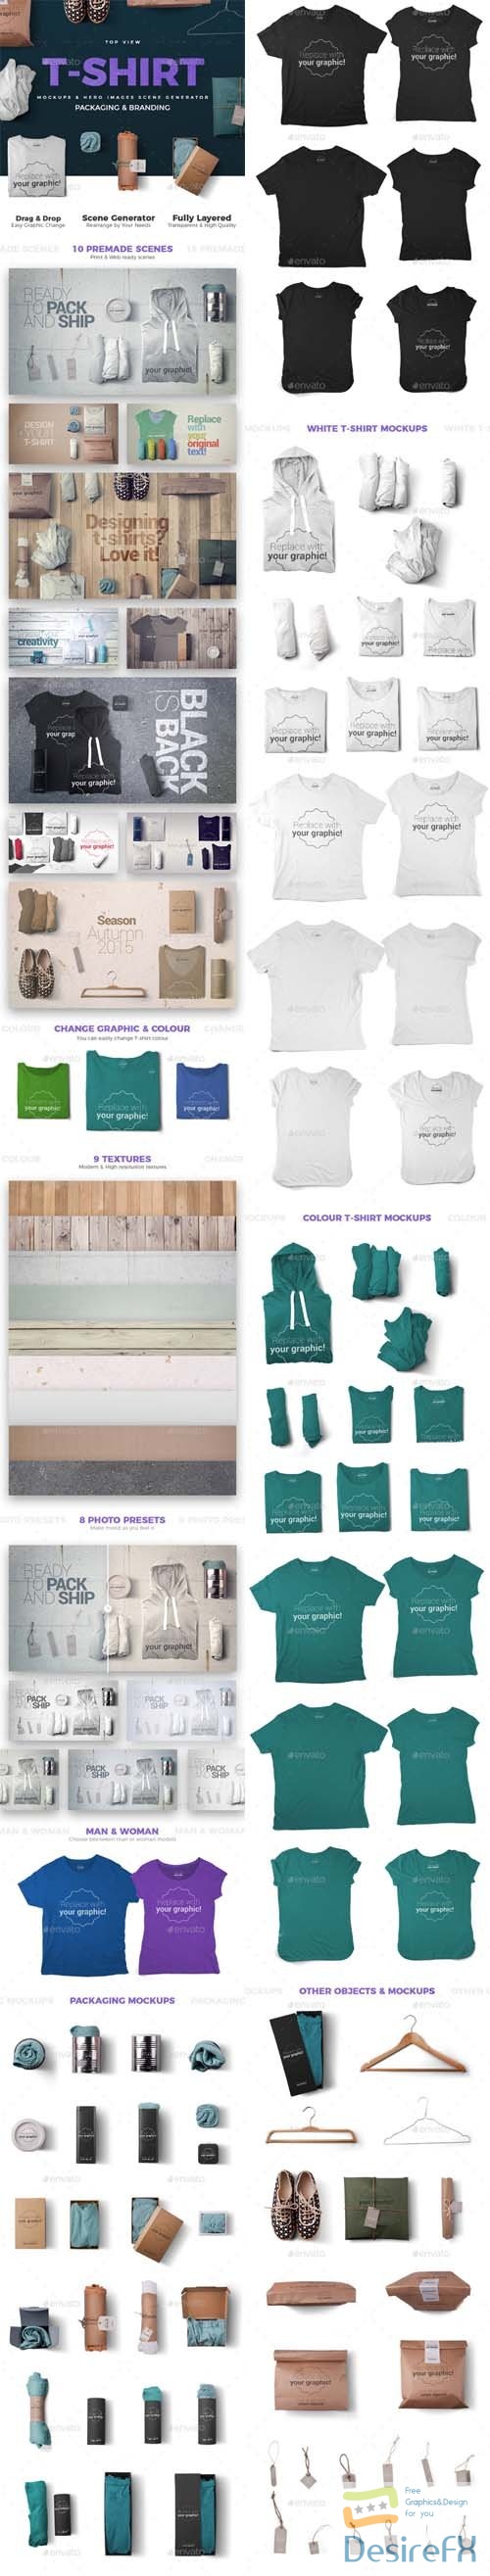 GR - T-shirt Mockups and Packages - Hero Images Scene Generator 13903877